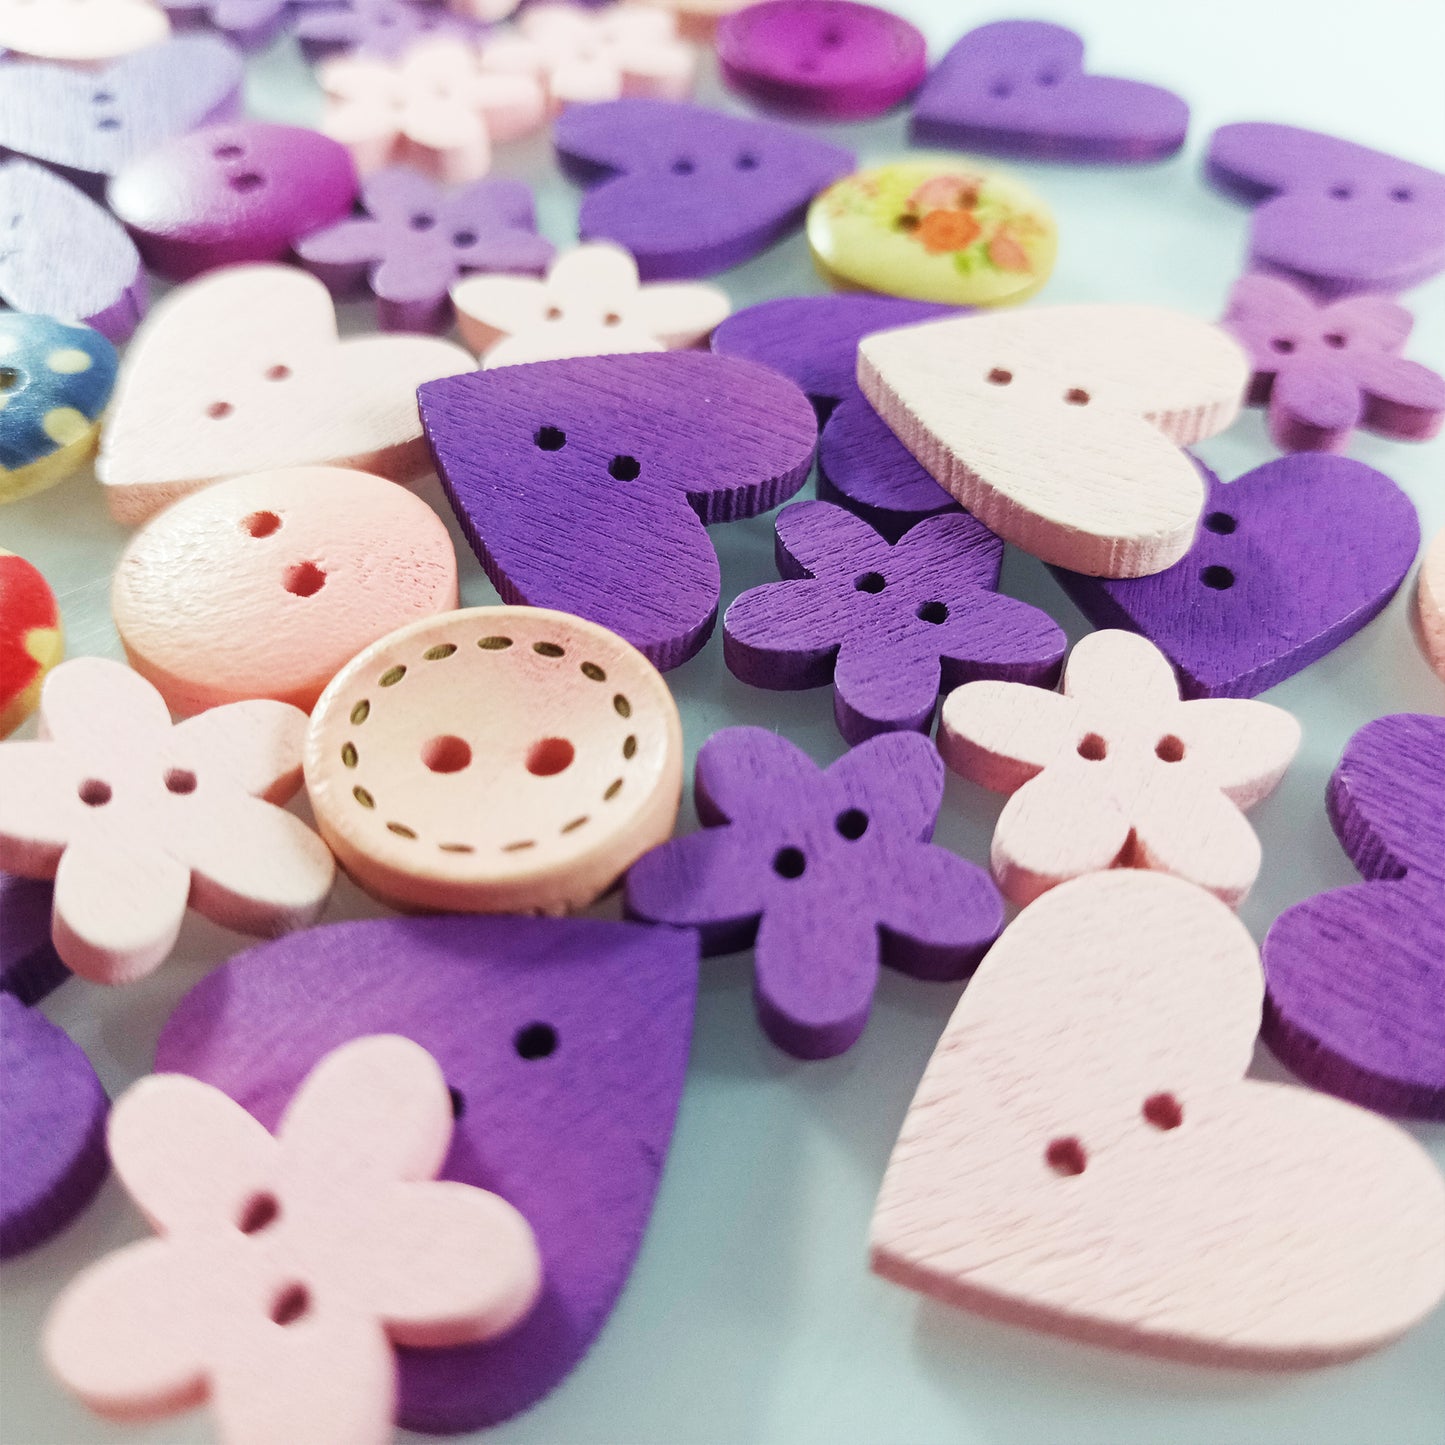 50pcs 10-25mm Flower Heart Shape Wooden Buttons Crafts 2 Hole Sewing Purple Pink